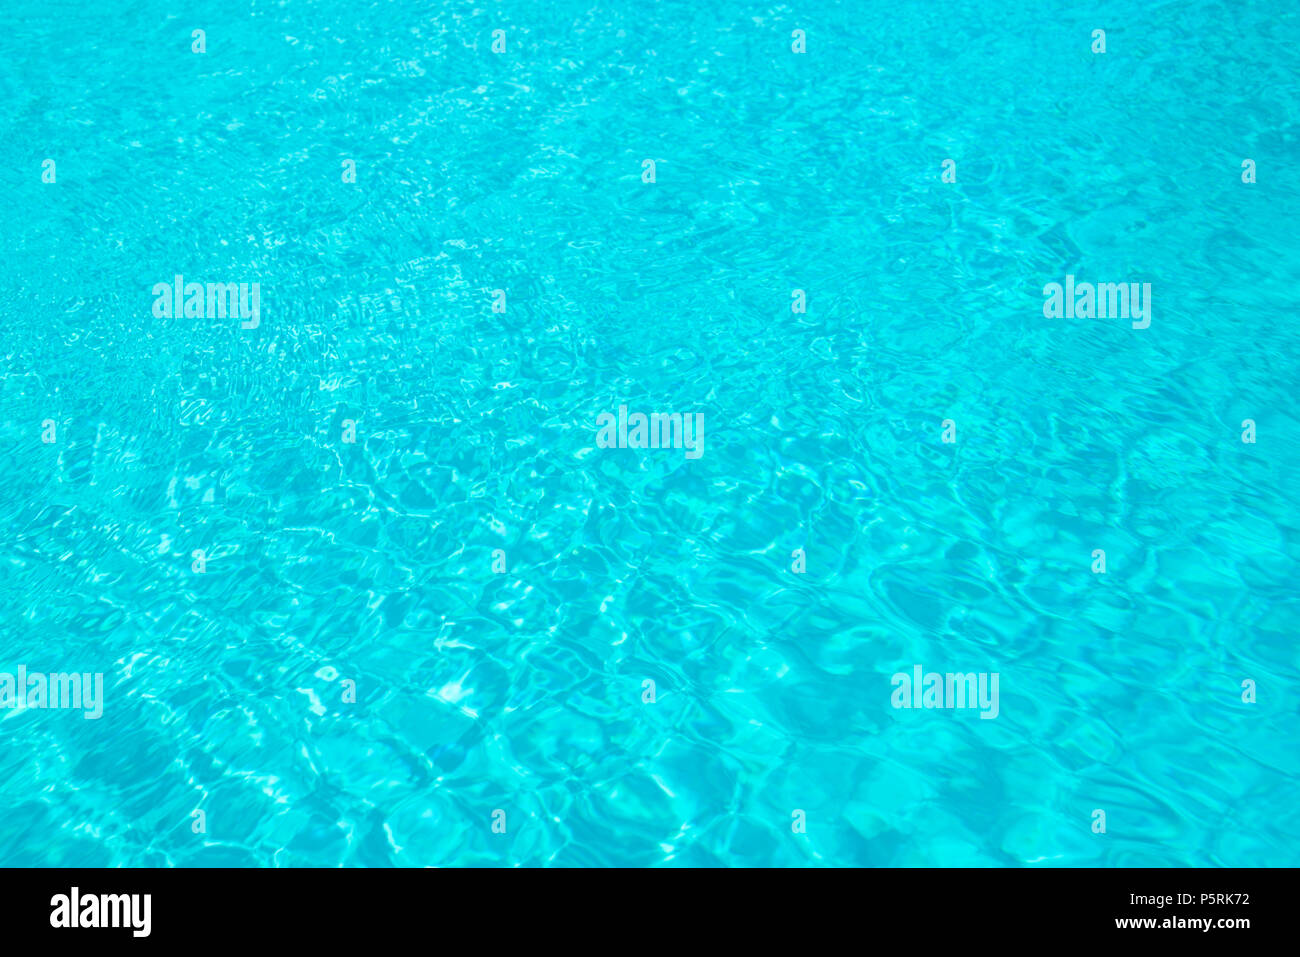 Turquoise blue ripped swimming pool water background, summer concept Stock Photo